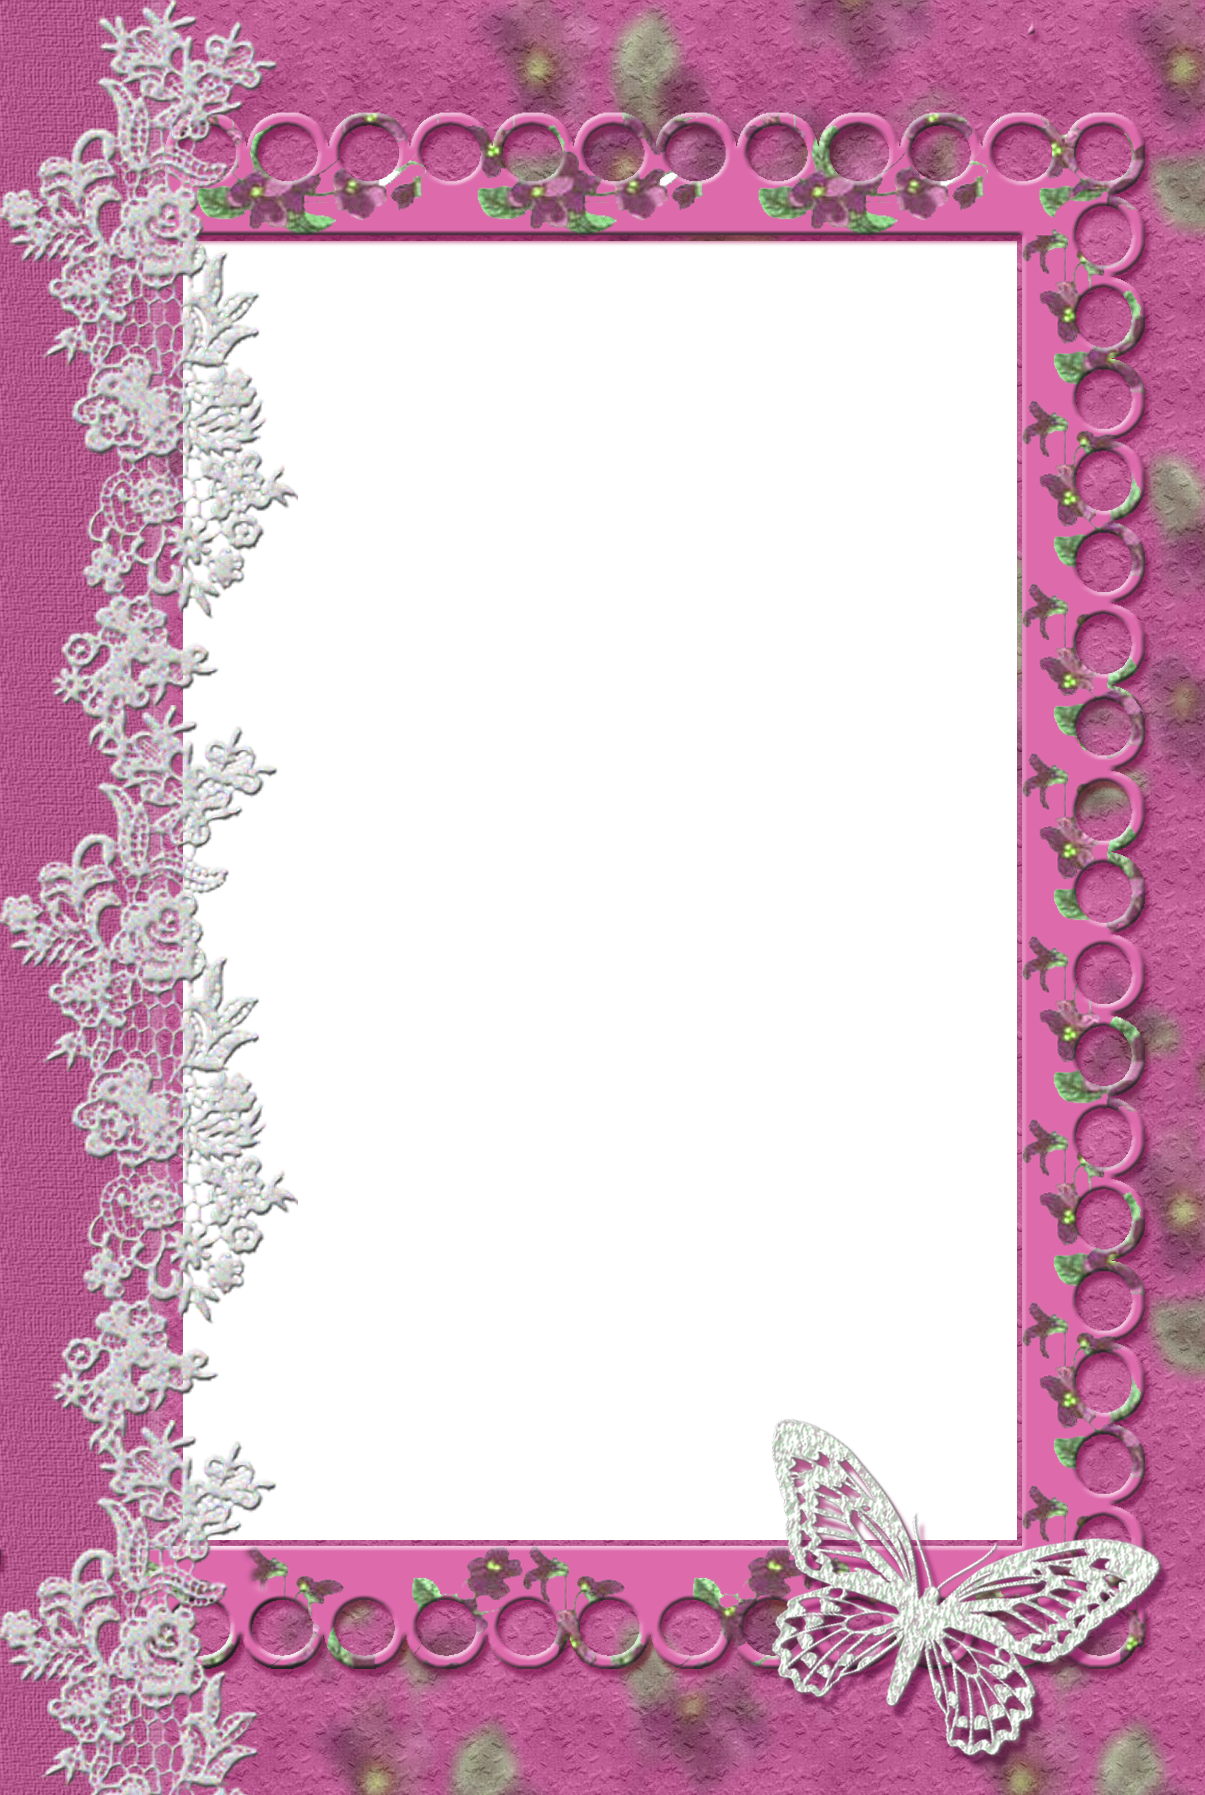 Girly Border Cute PNG Pic